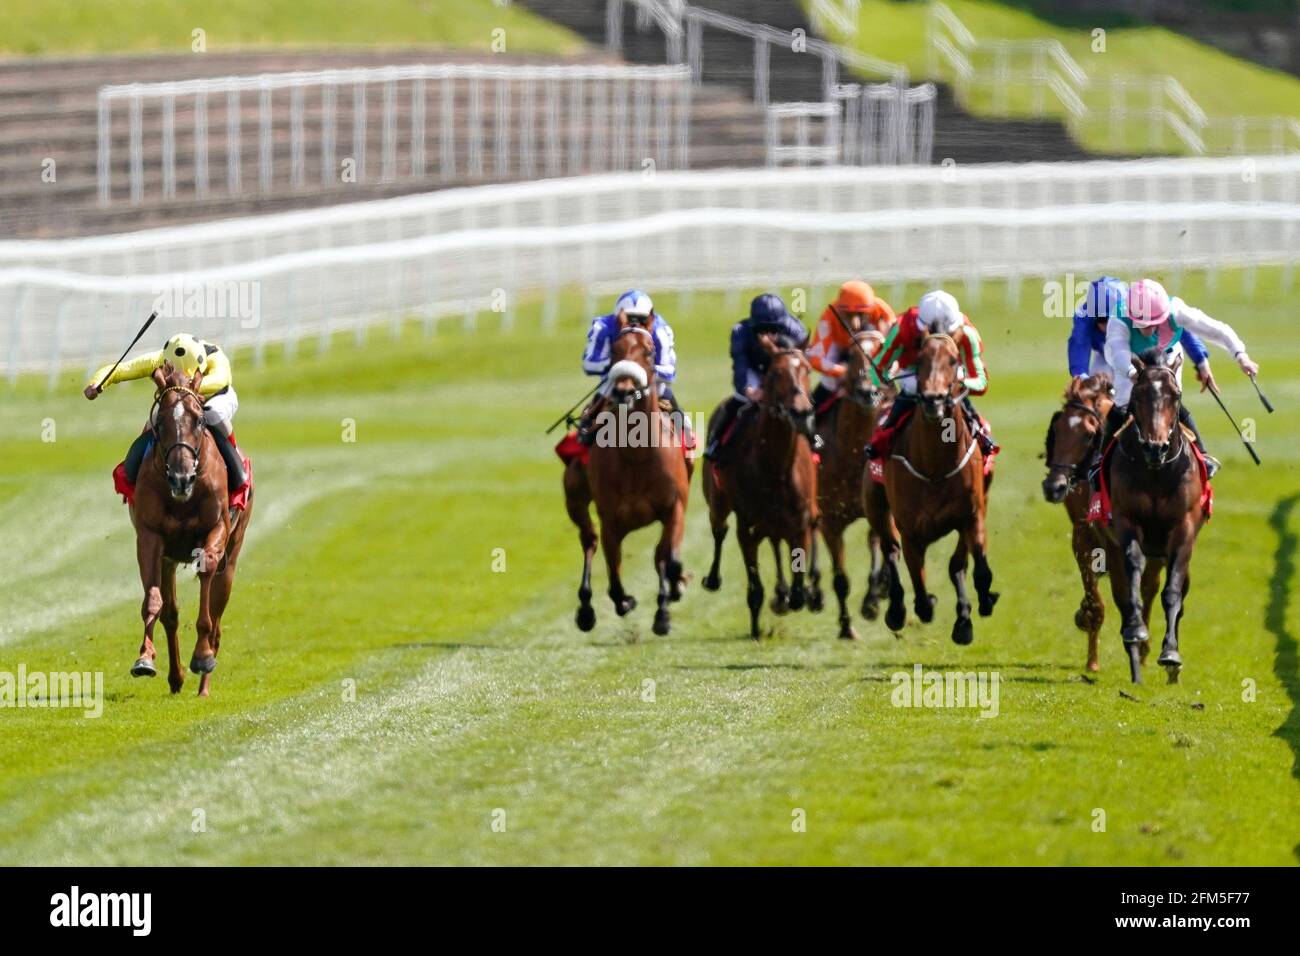 El Drama ridden by Andrea Atzeni (left) on their way to winning the tote+ Biggest Dividends At tote.co.uk Dee Stakes during Ladies Day of the Boodles May Festival 2021 at Chester Racecourse. Picture date: Thursday May 6, 2021. See PA story RACING Chester. Photo credit should read: Alan Crowhurst/PA Wire. RESTRICTIONS: Use subject to restrictions. Editorial use only, no commercial use without prior consent from rights holder. Stock Photo